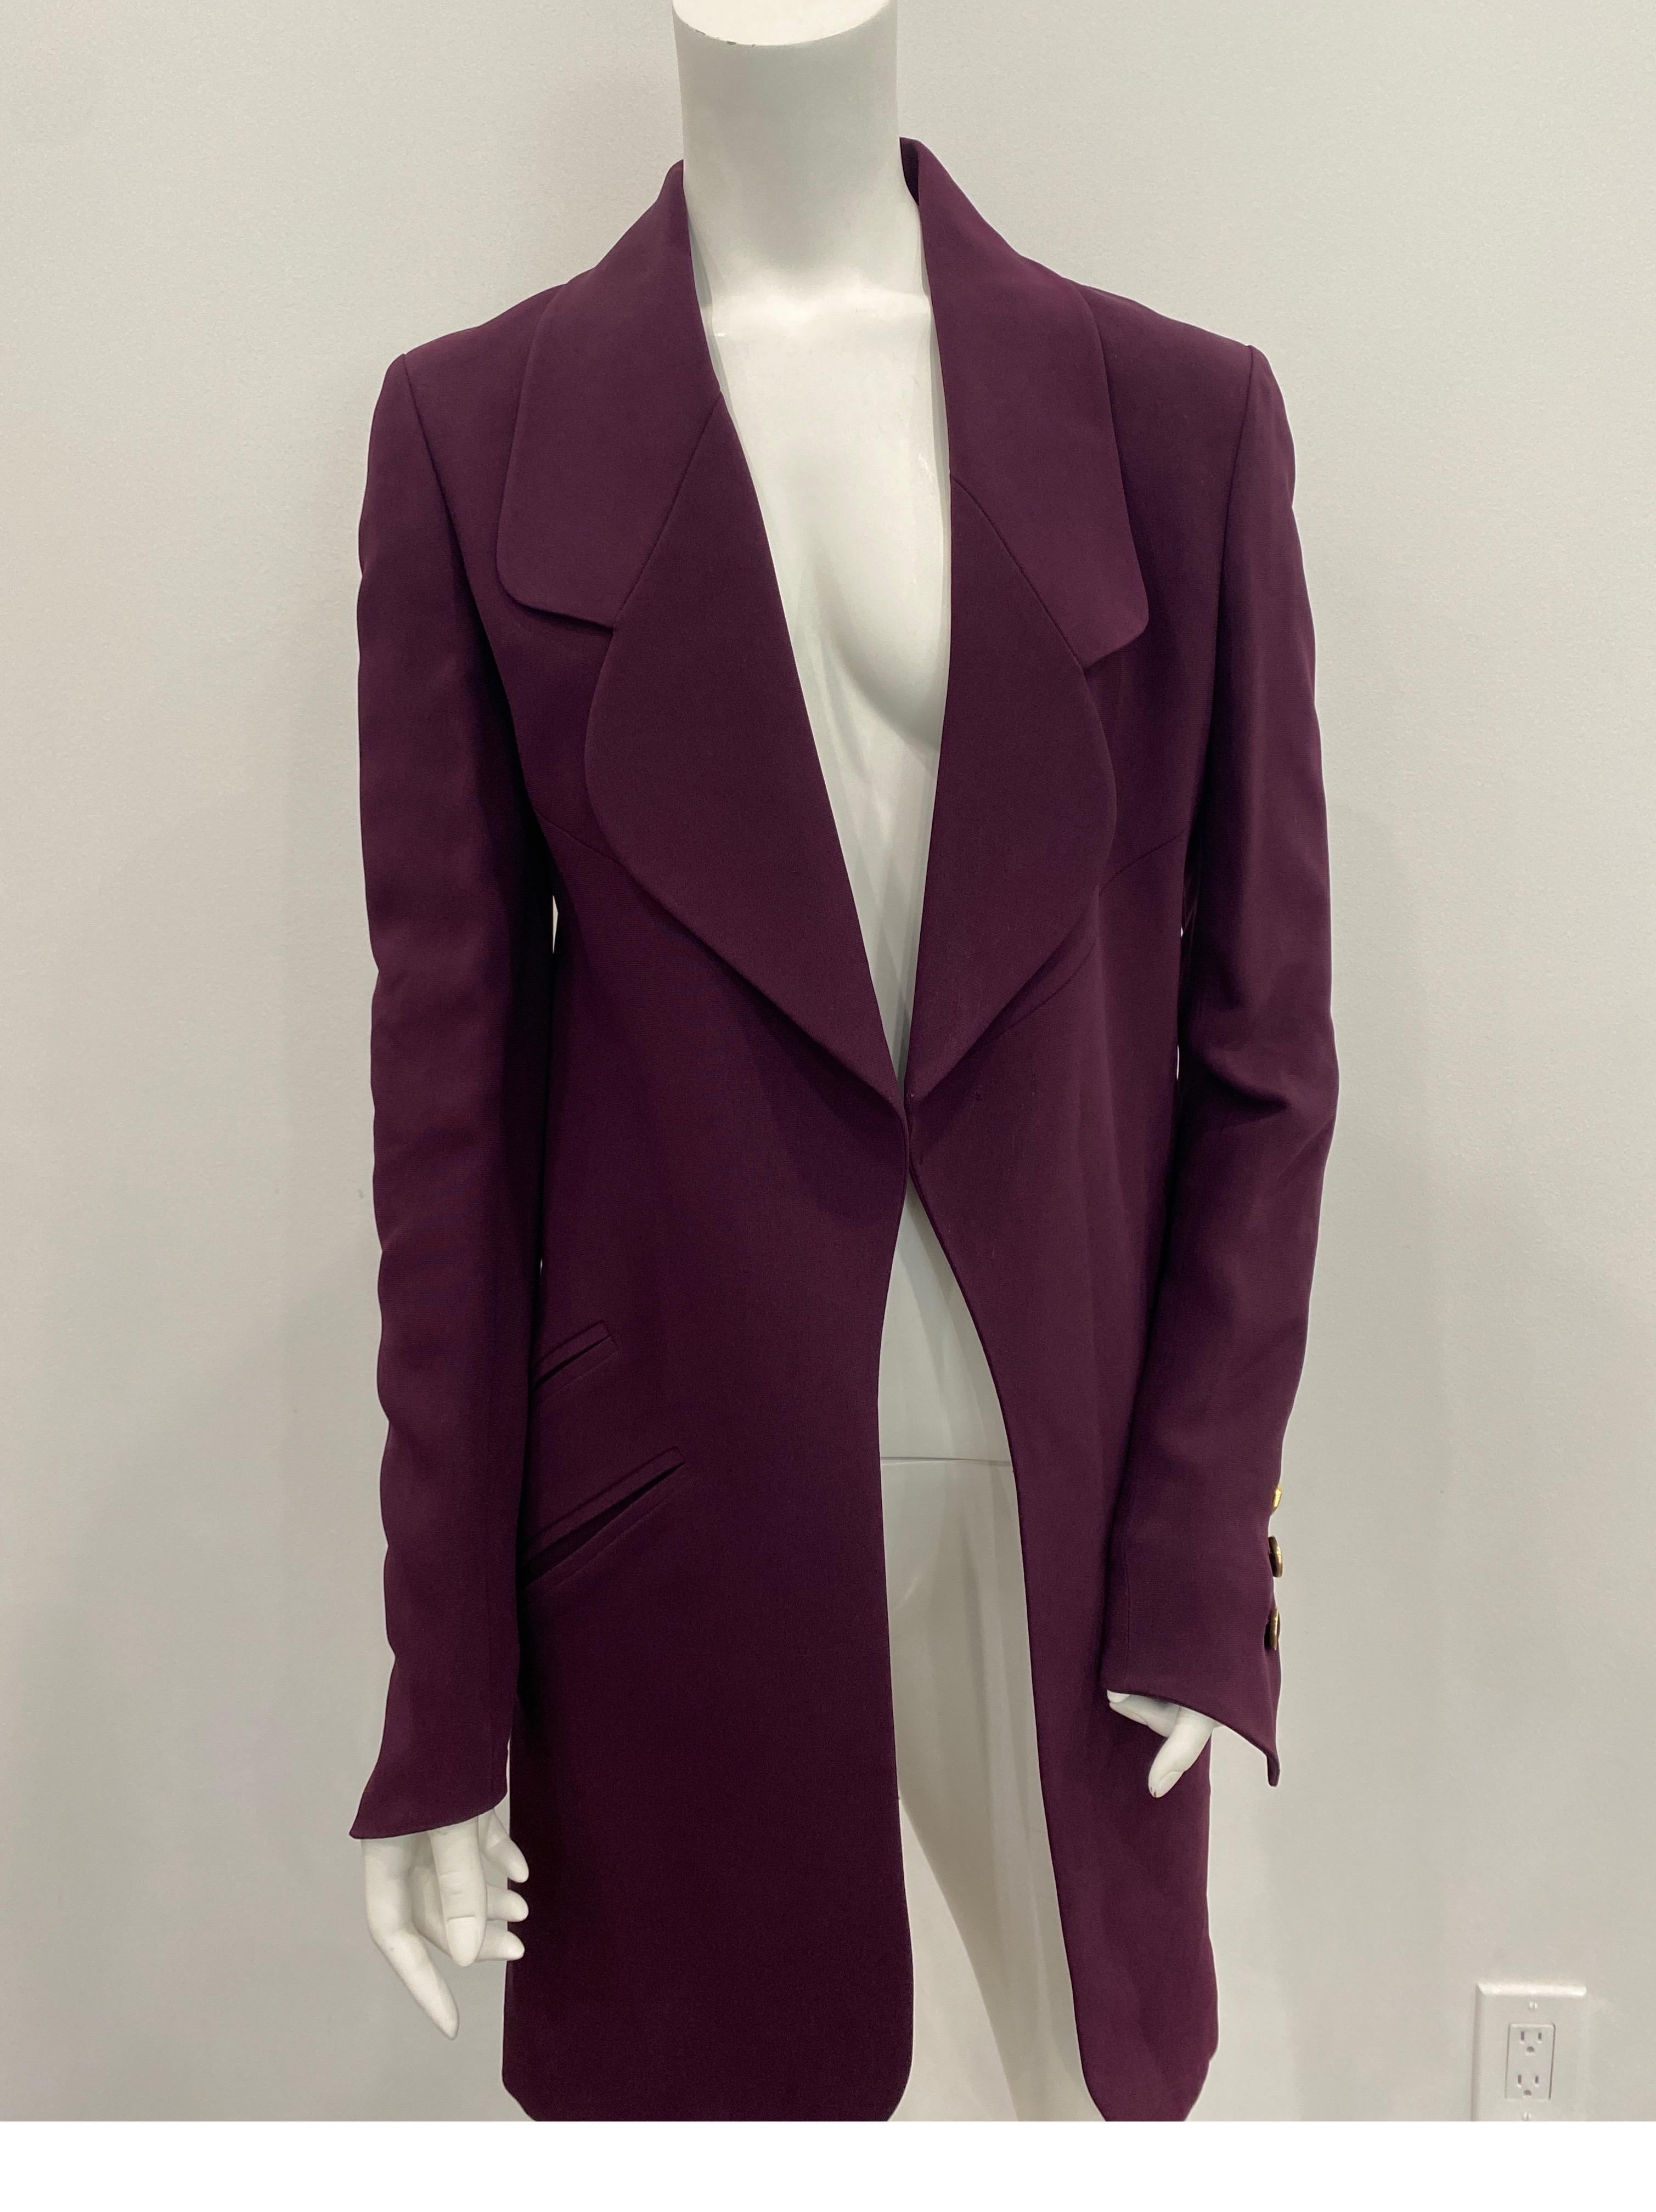 Karl Lagerfeld Eggplant 3/4 Coat - Size 36 For Sale 1